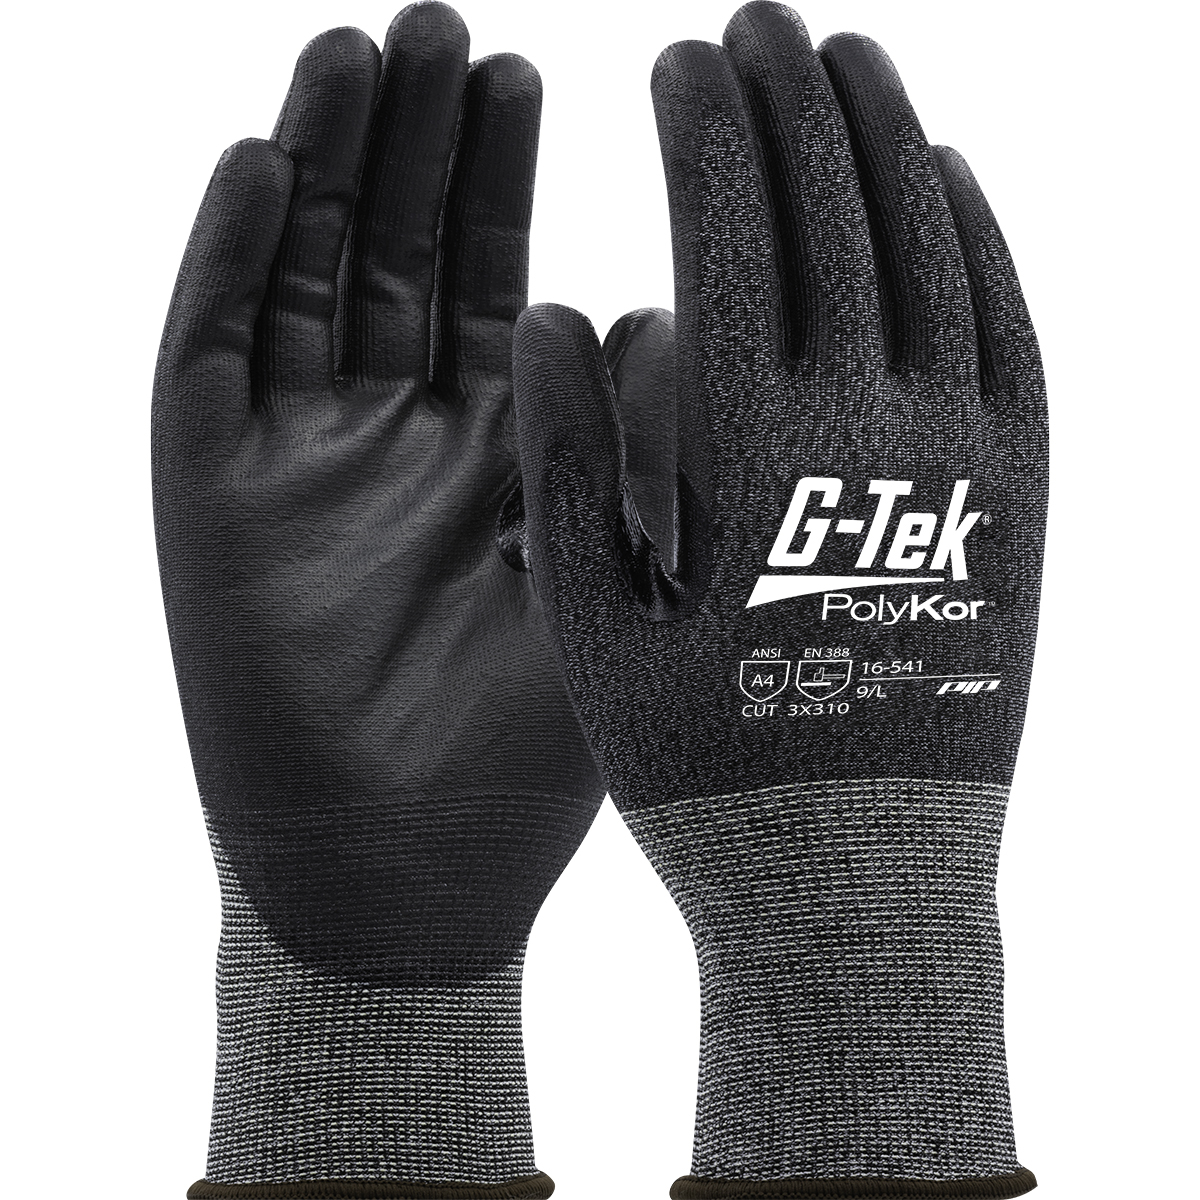 G-Tek® PolyKor® - Seamless Knit PolyKor® Blended Glove with Polyurethane Coated Flat Grip on Palm & Fingers - 21 Gauge - Touchscreen Compatible. - Hand Protection